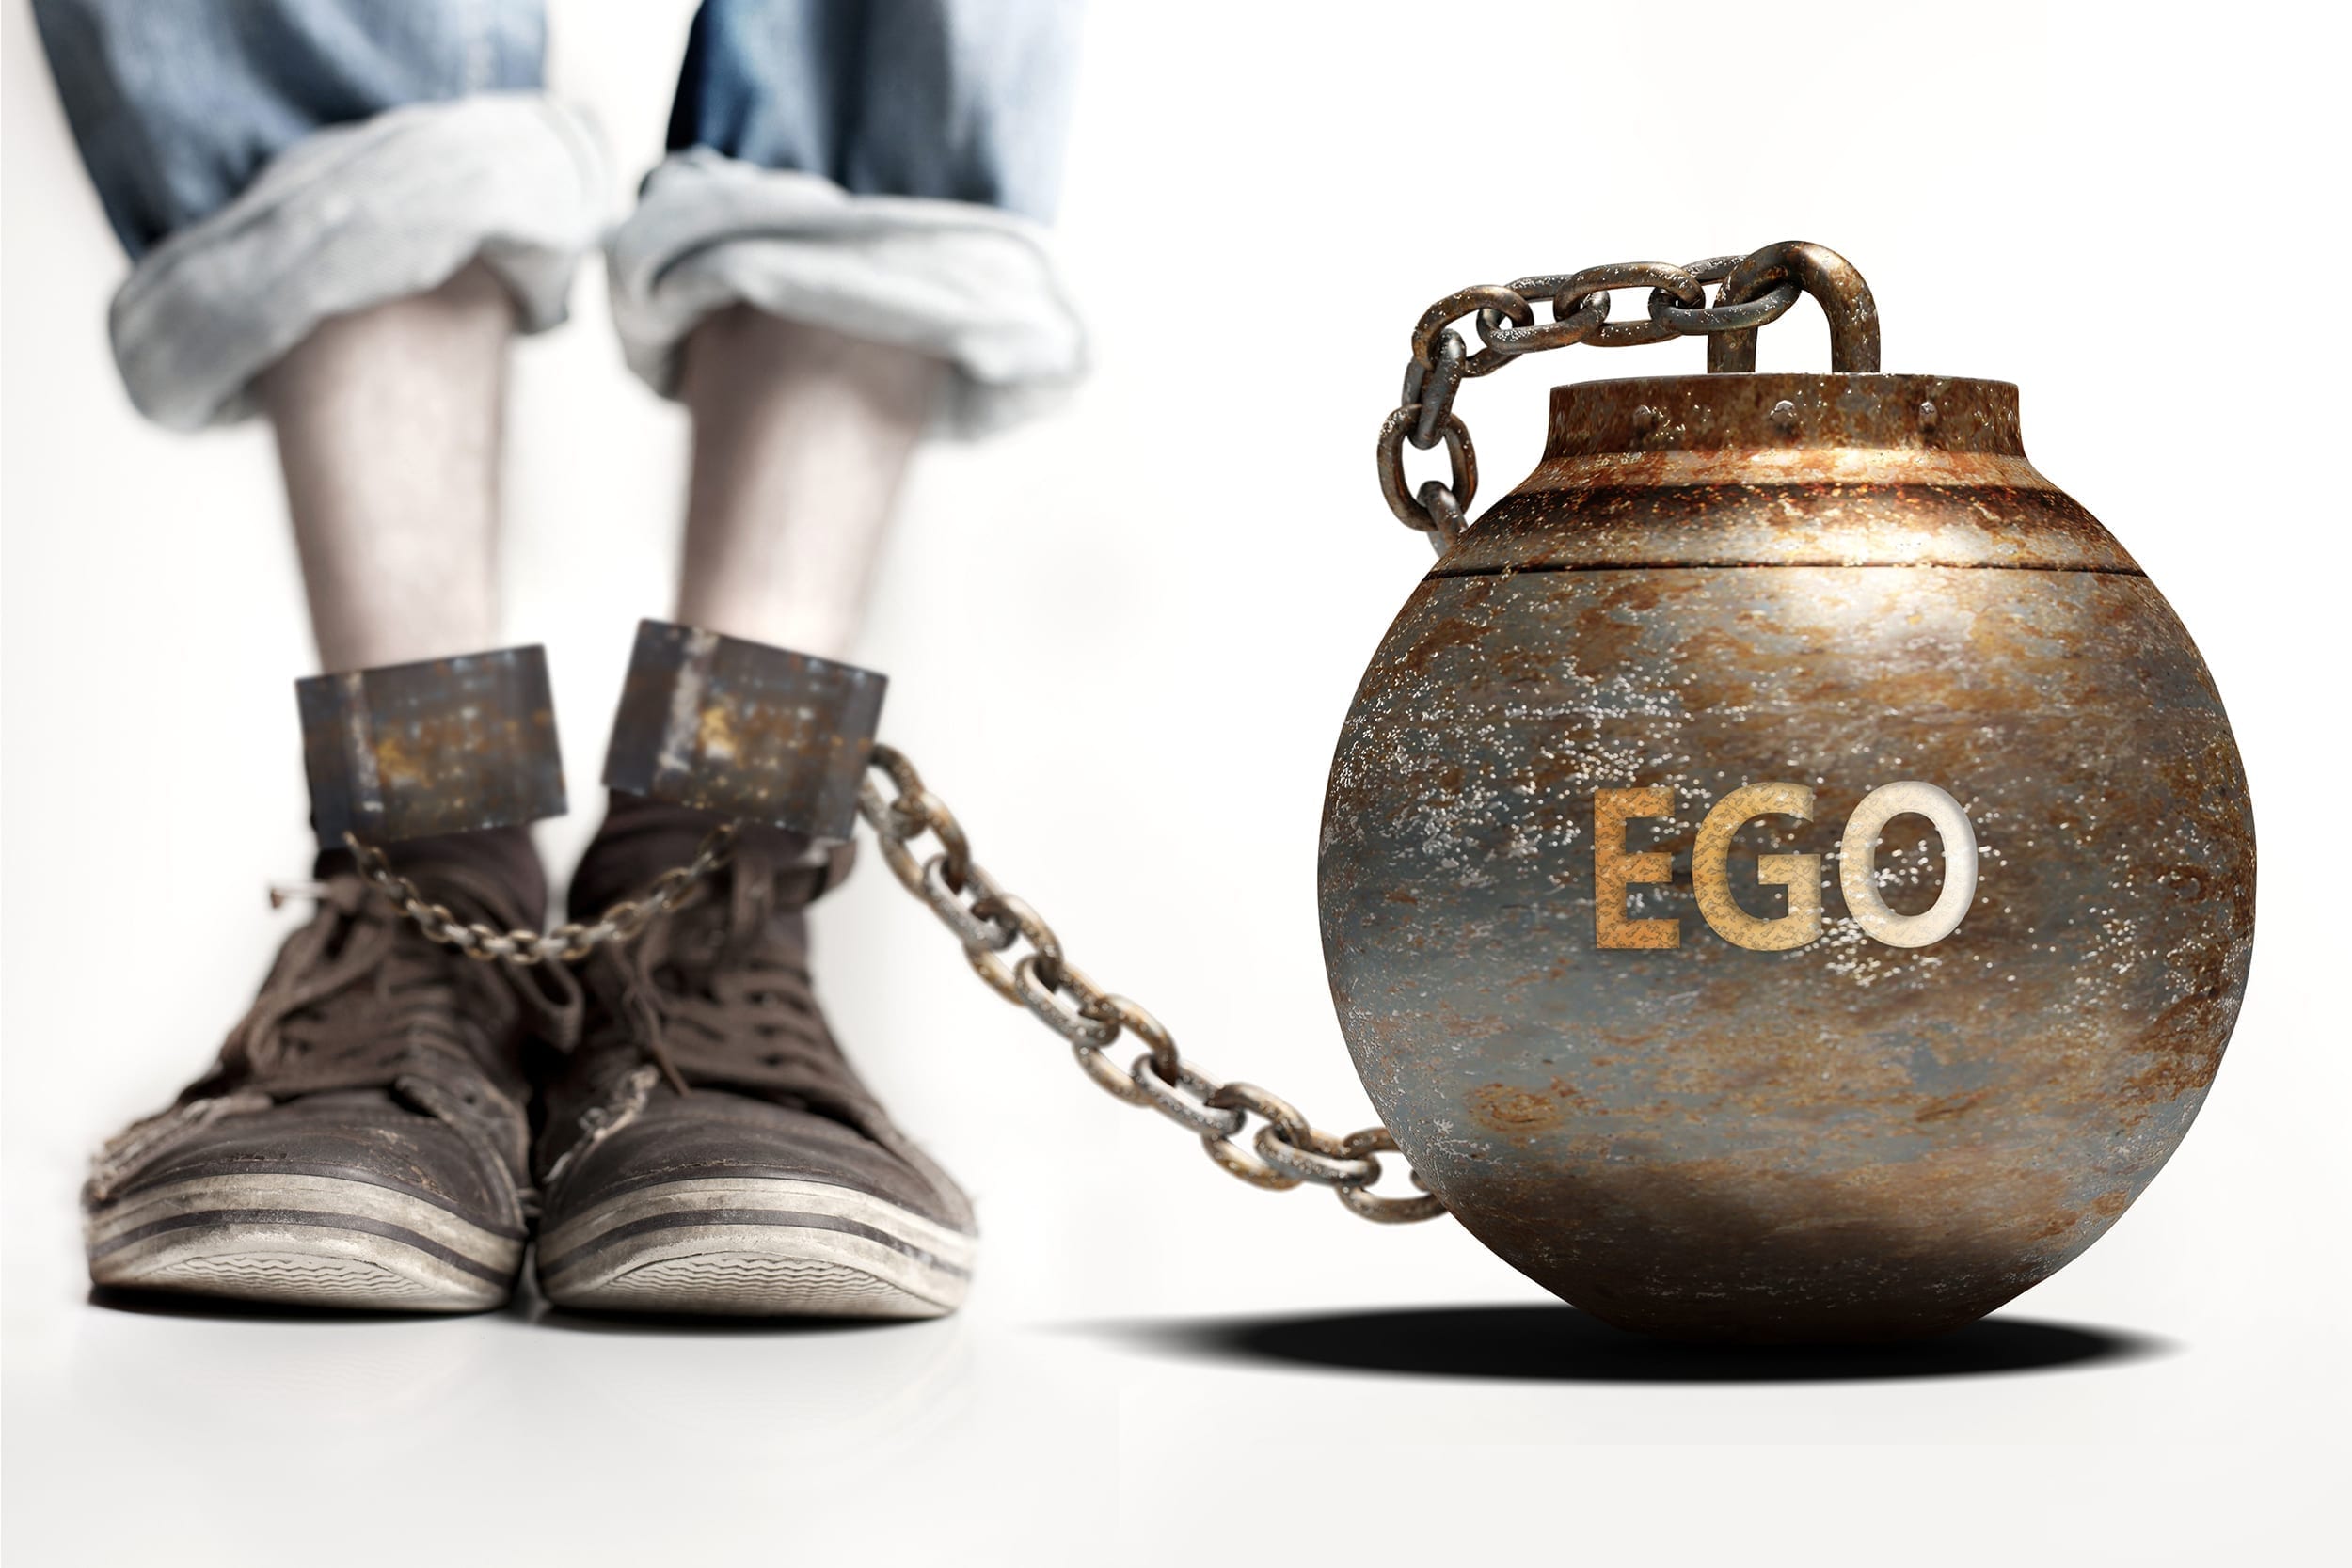 ego ball and chain attached to persons feet